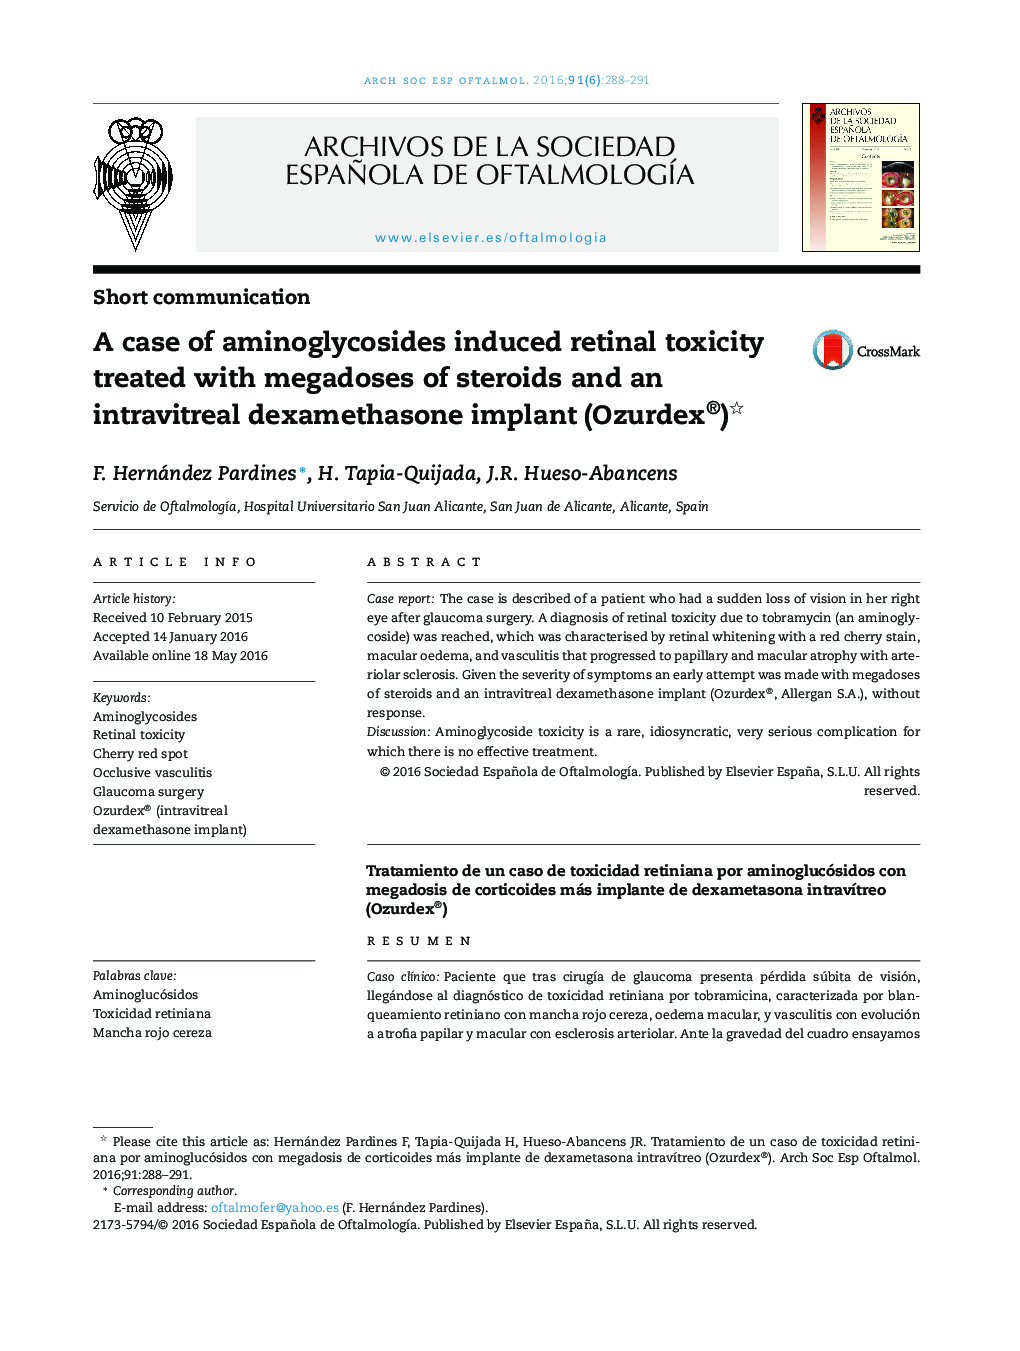 A case of aminoglycosides induced retinal toxicity treated with megadoses of steroids and an intravitreal dexamethasone implant (Ozurdex®) 